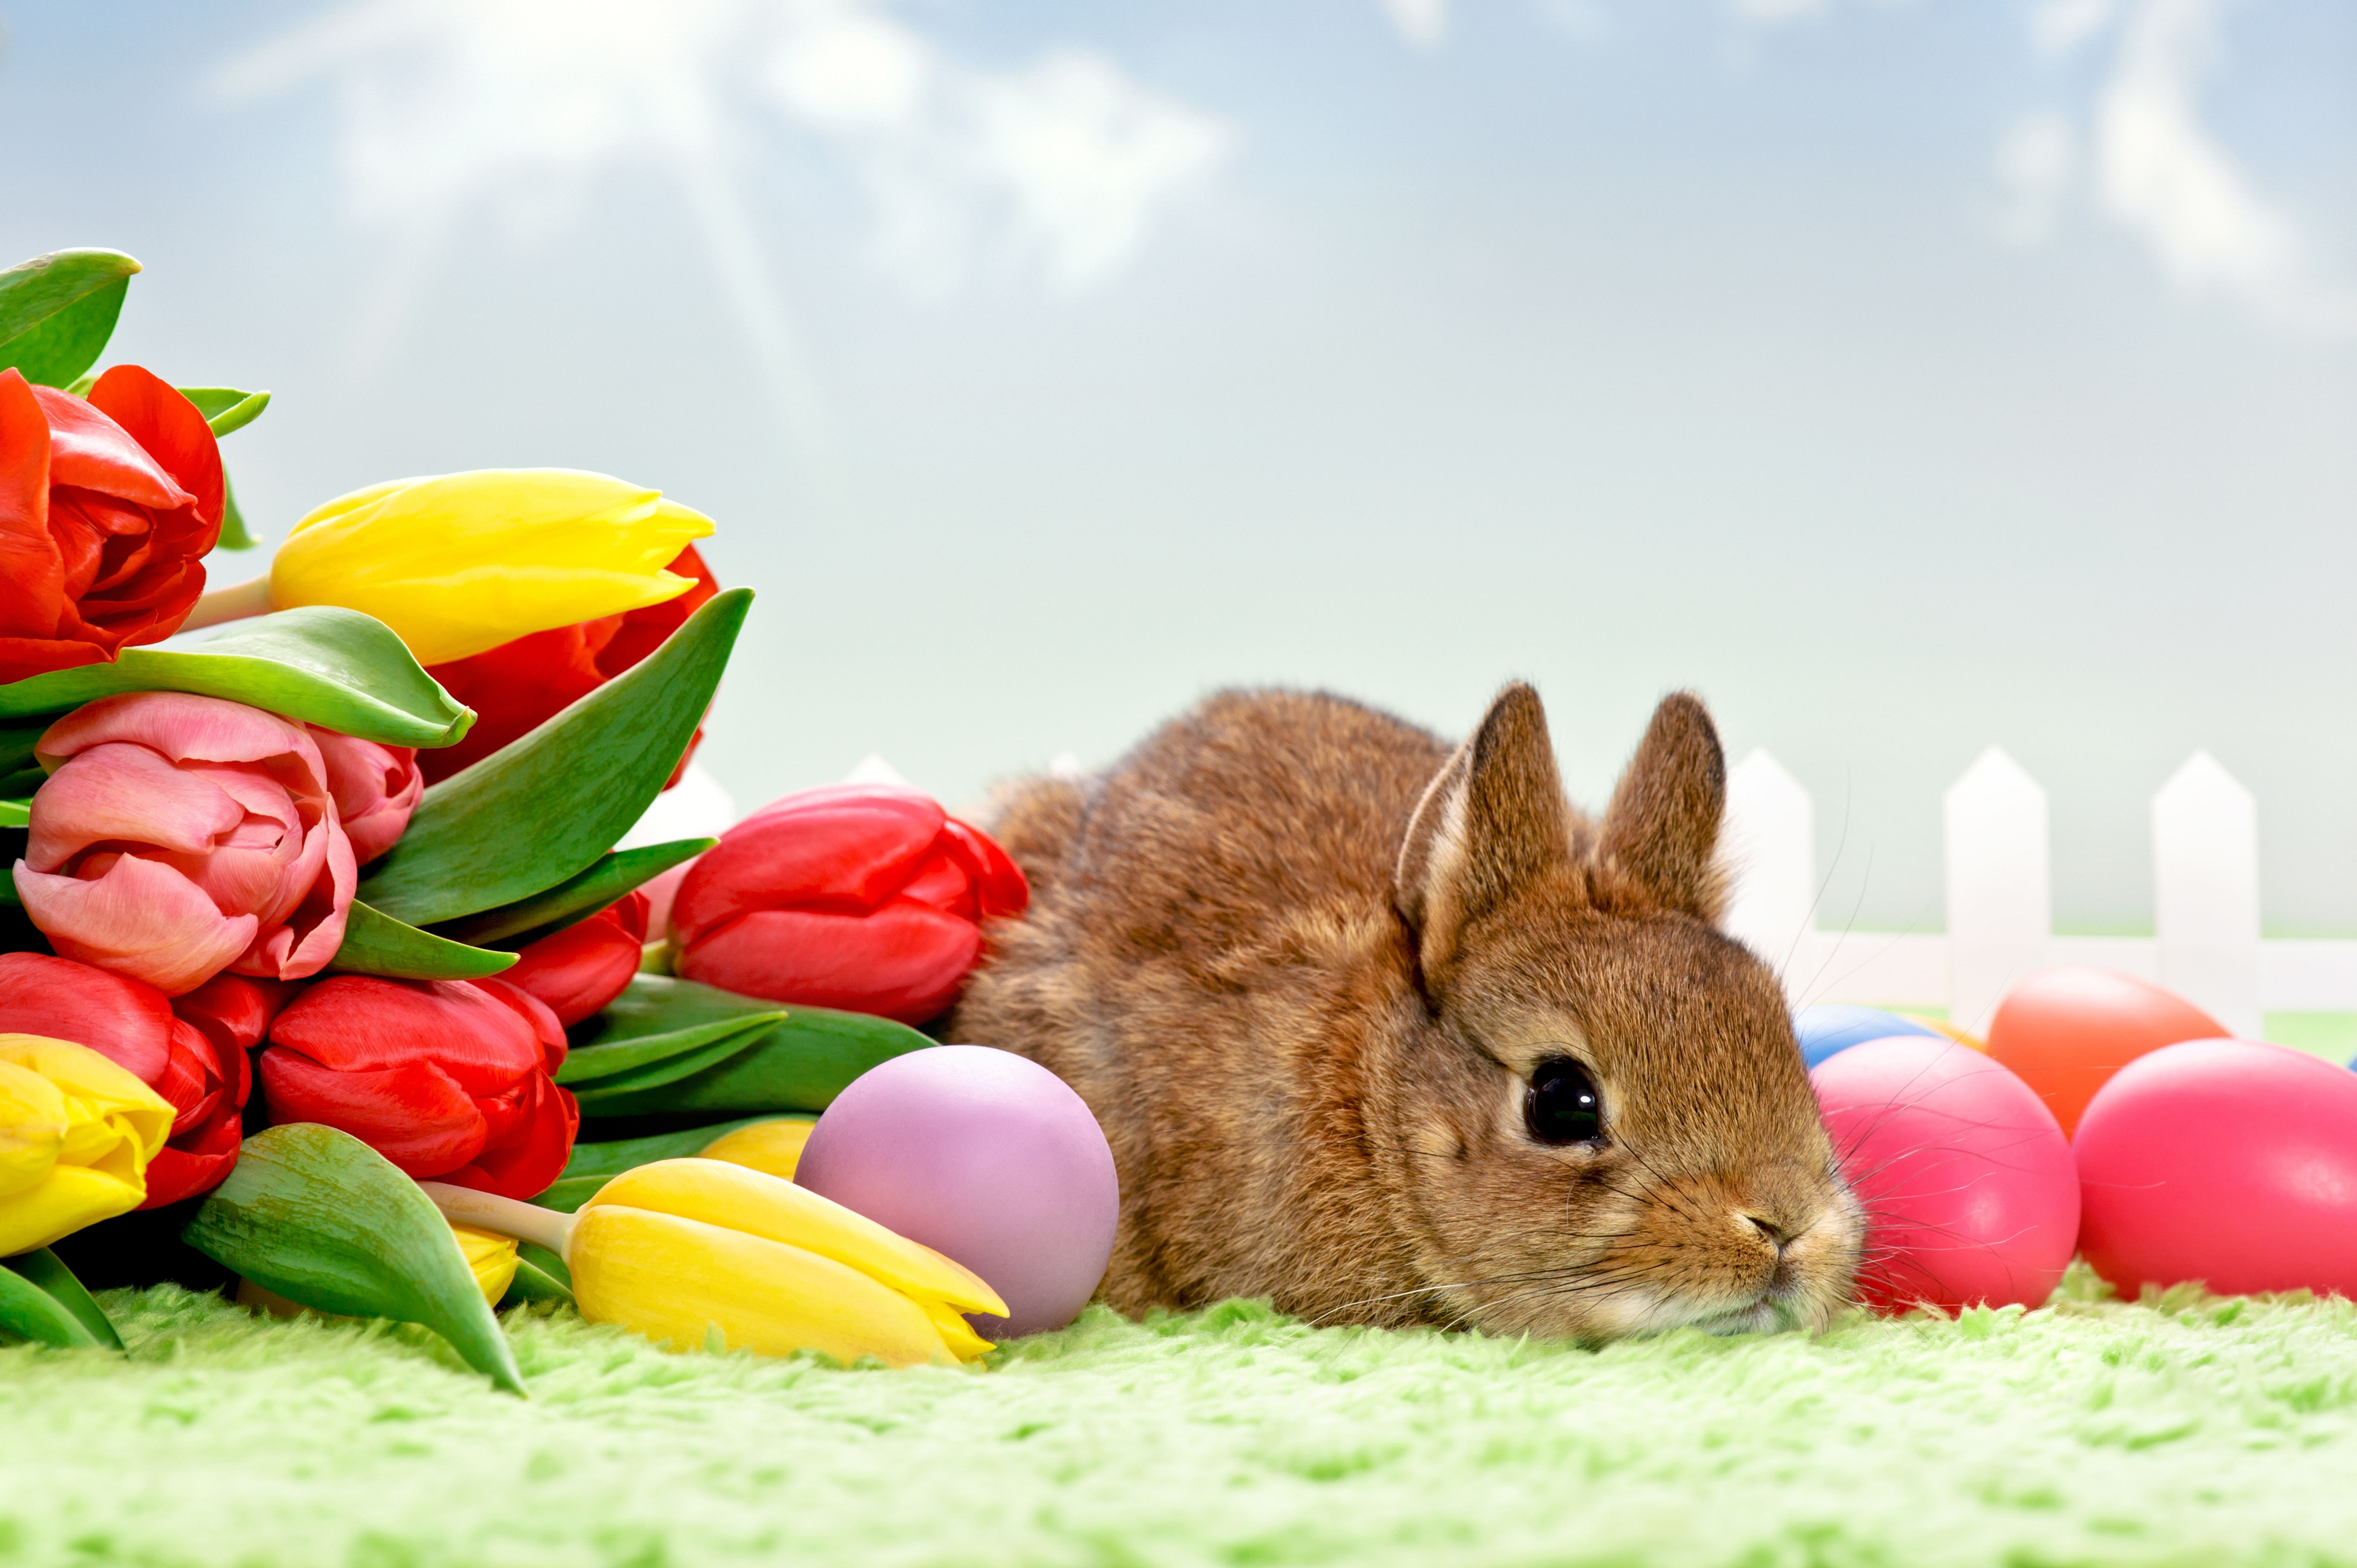 Free download Tulips and Easter bunny wallpaper and image